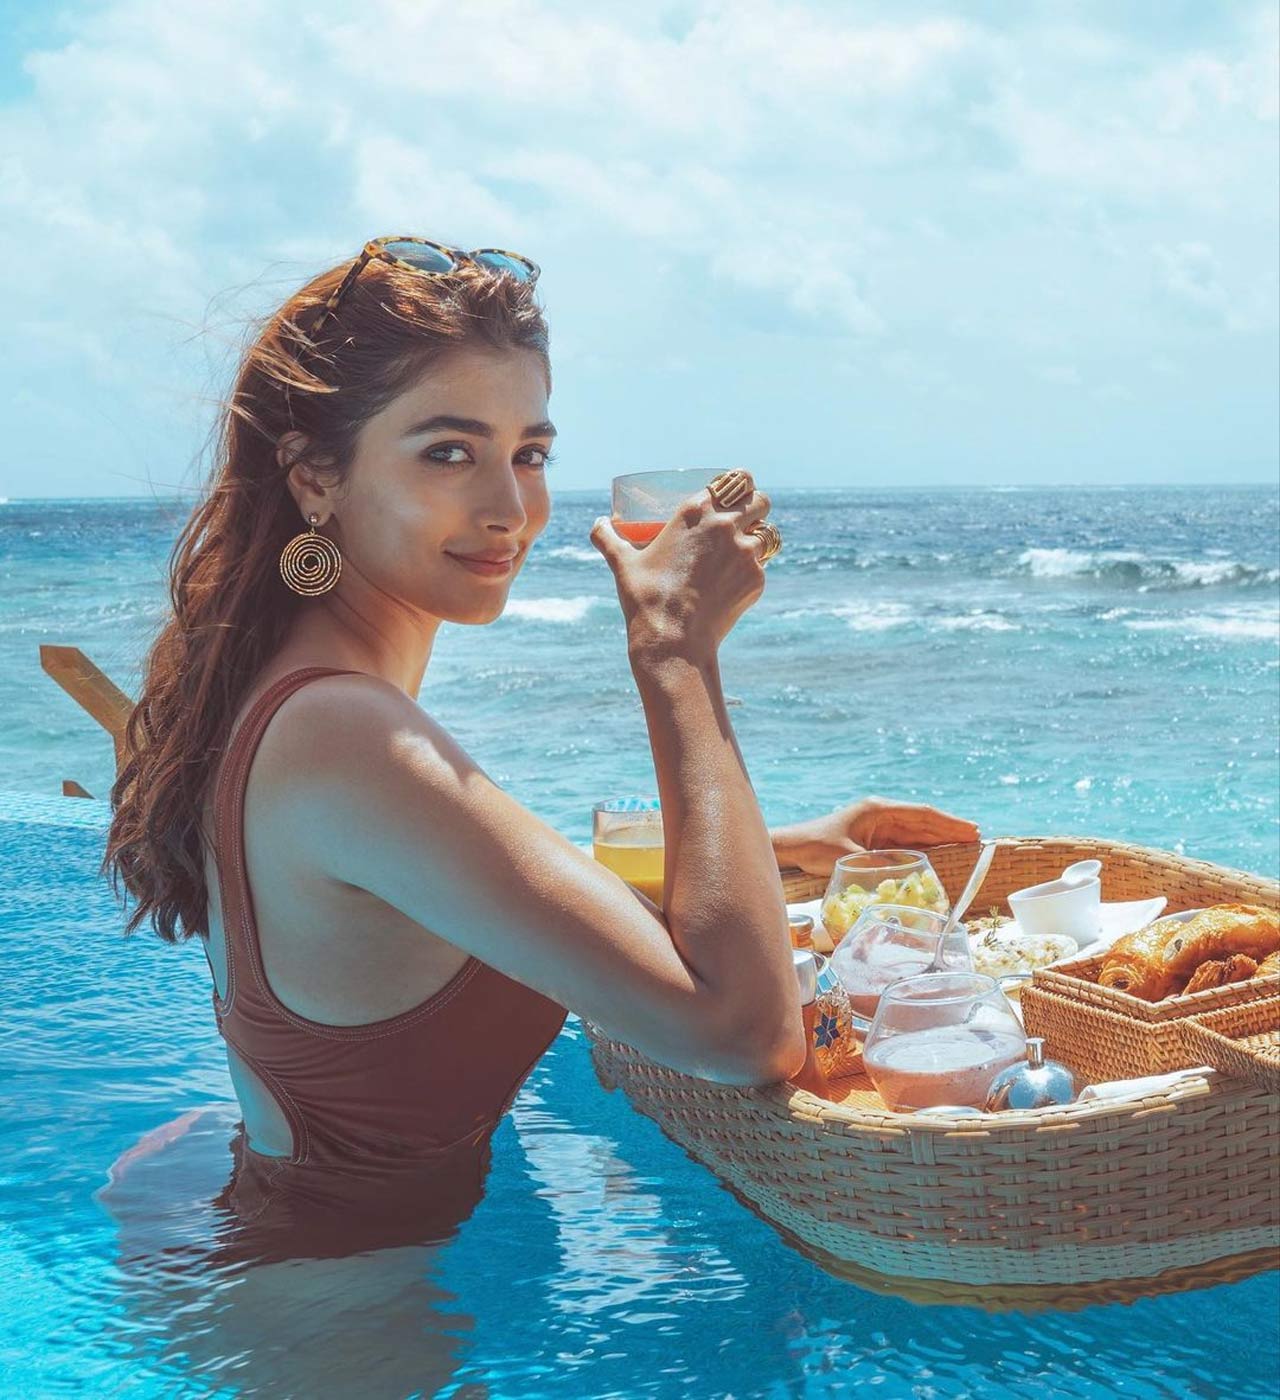 Pooja Hegde donned a colourful tropical outfit as she took a ride on a cruise during her Maldivian vacation. Her open-hair-I-don't-care attitude, as she chills on the beautiful island, is the current mood of every other person right now!